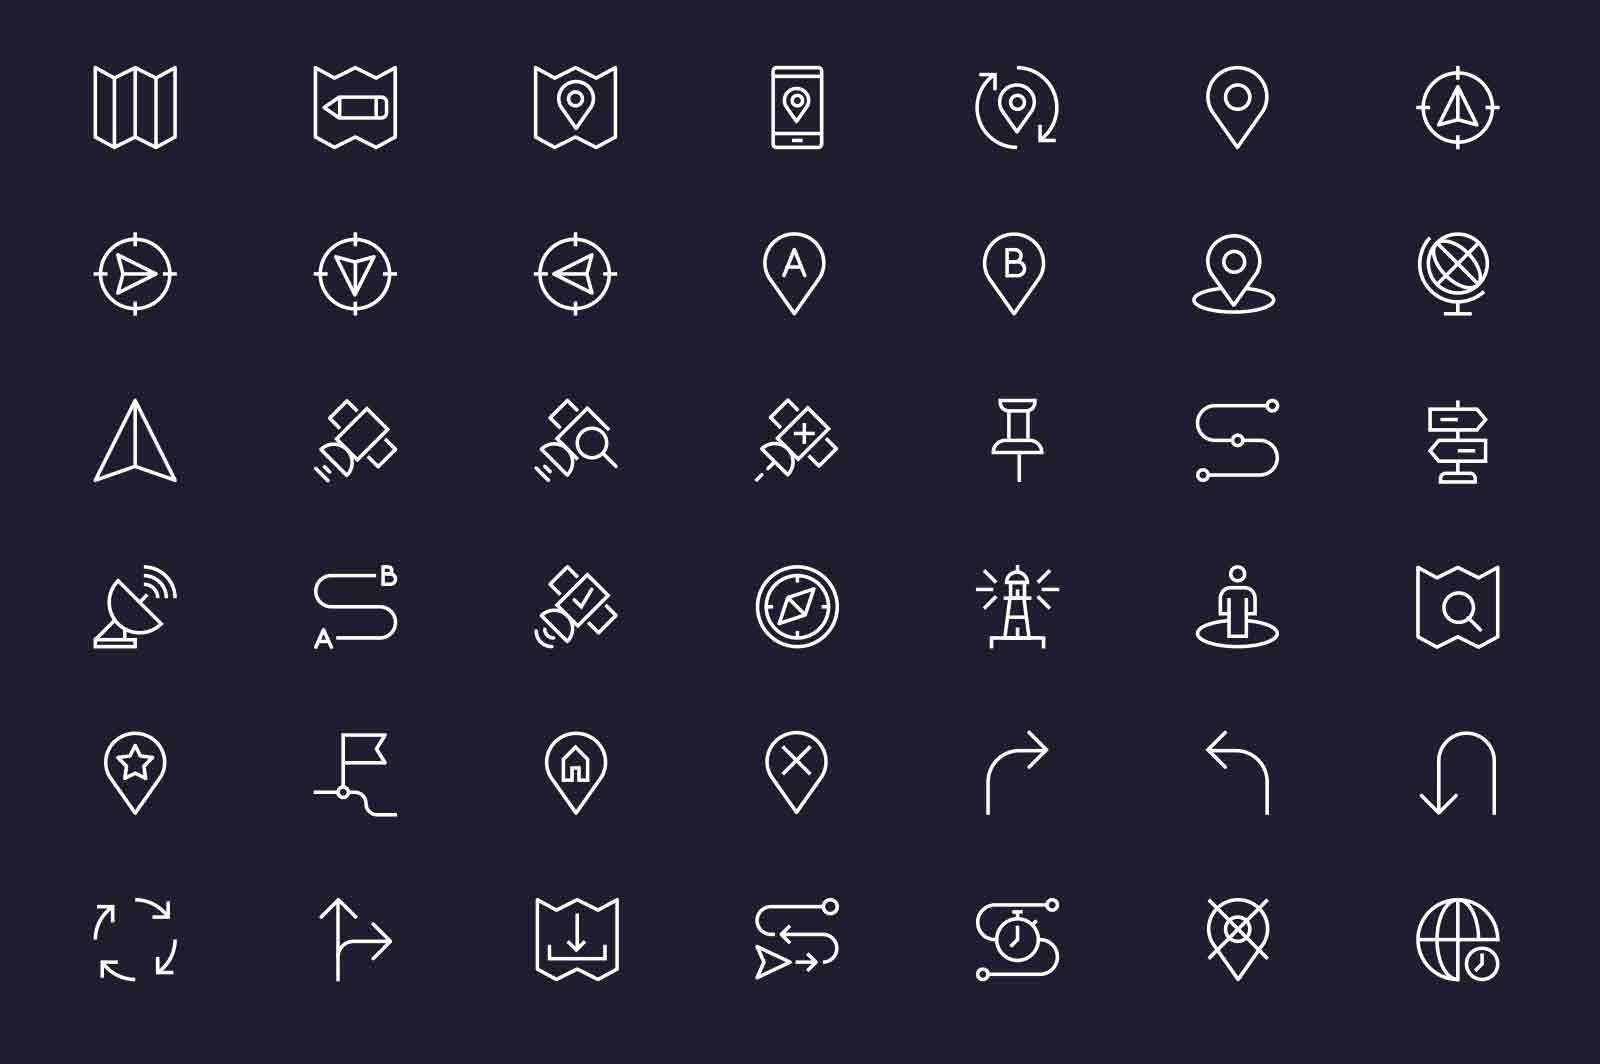 Follow map and find way icons set vector illustration. Methods to get to specific place line icon. Dark background